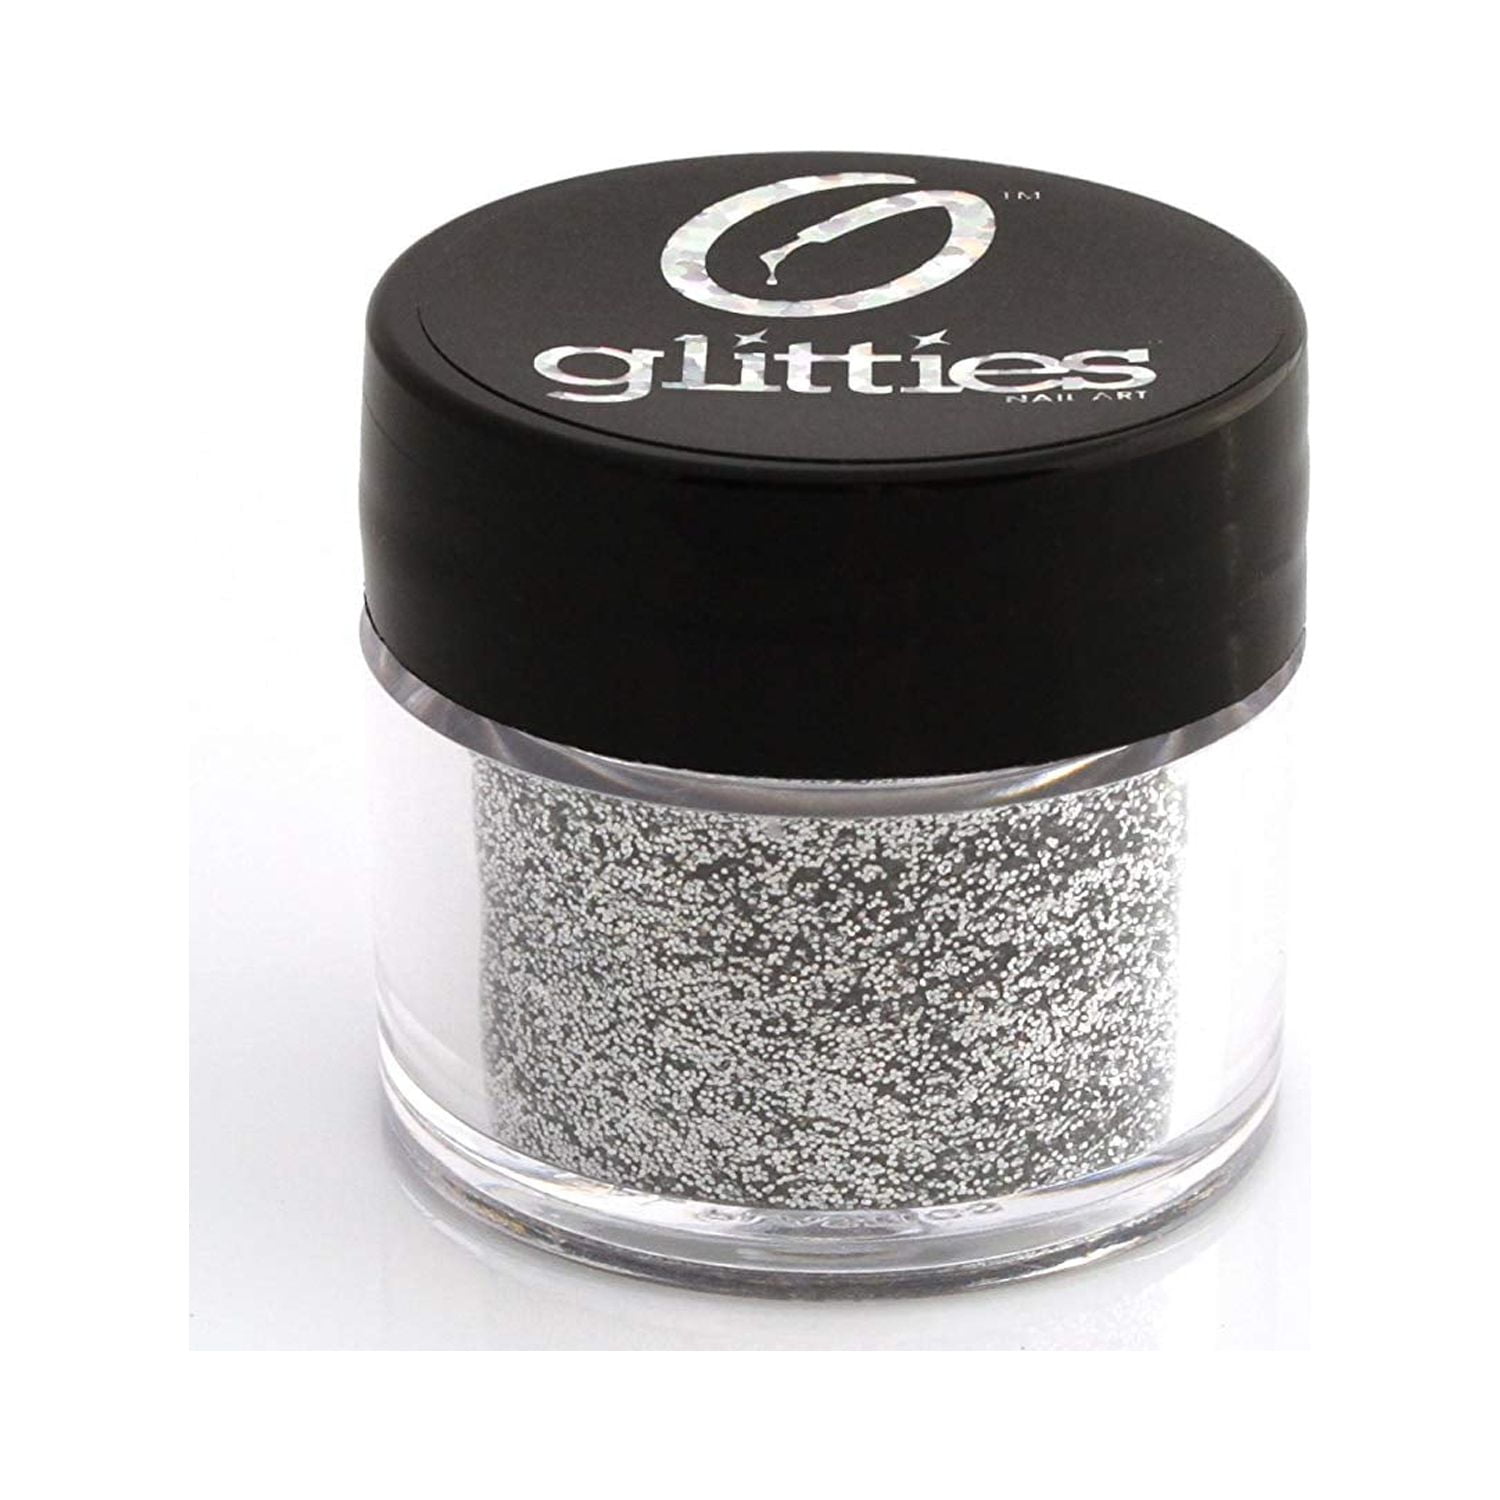 Iridescent Light Ice Blue Extra Fine Glitter for nails, acrylic, gels,  crafts